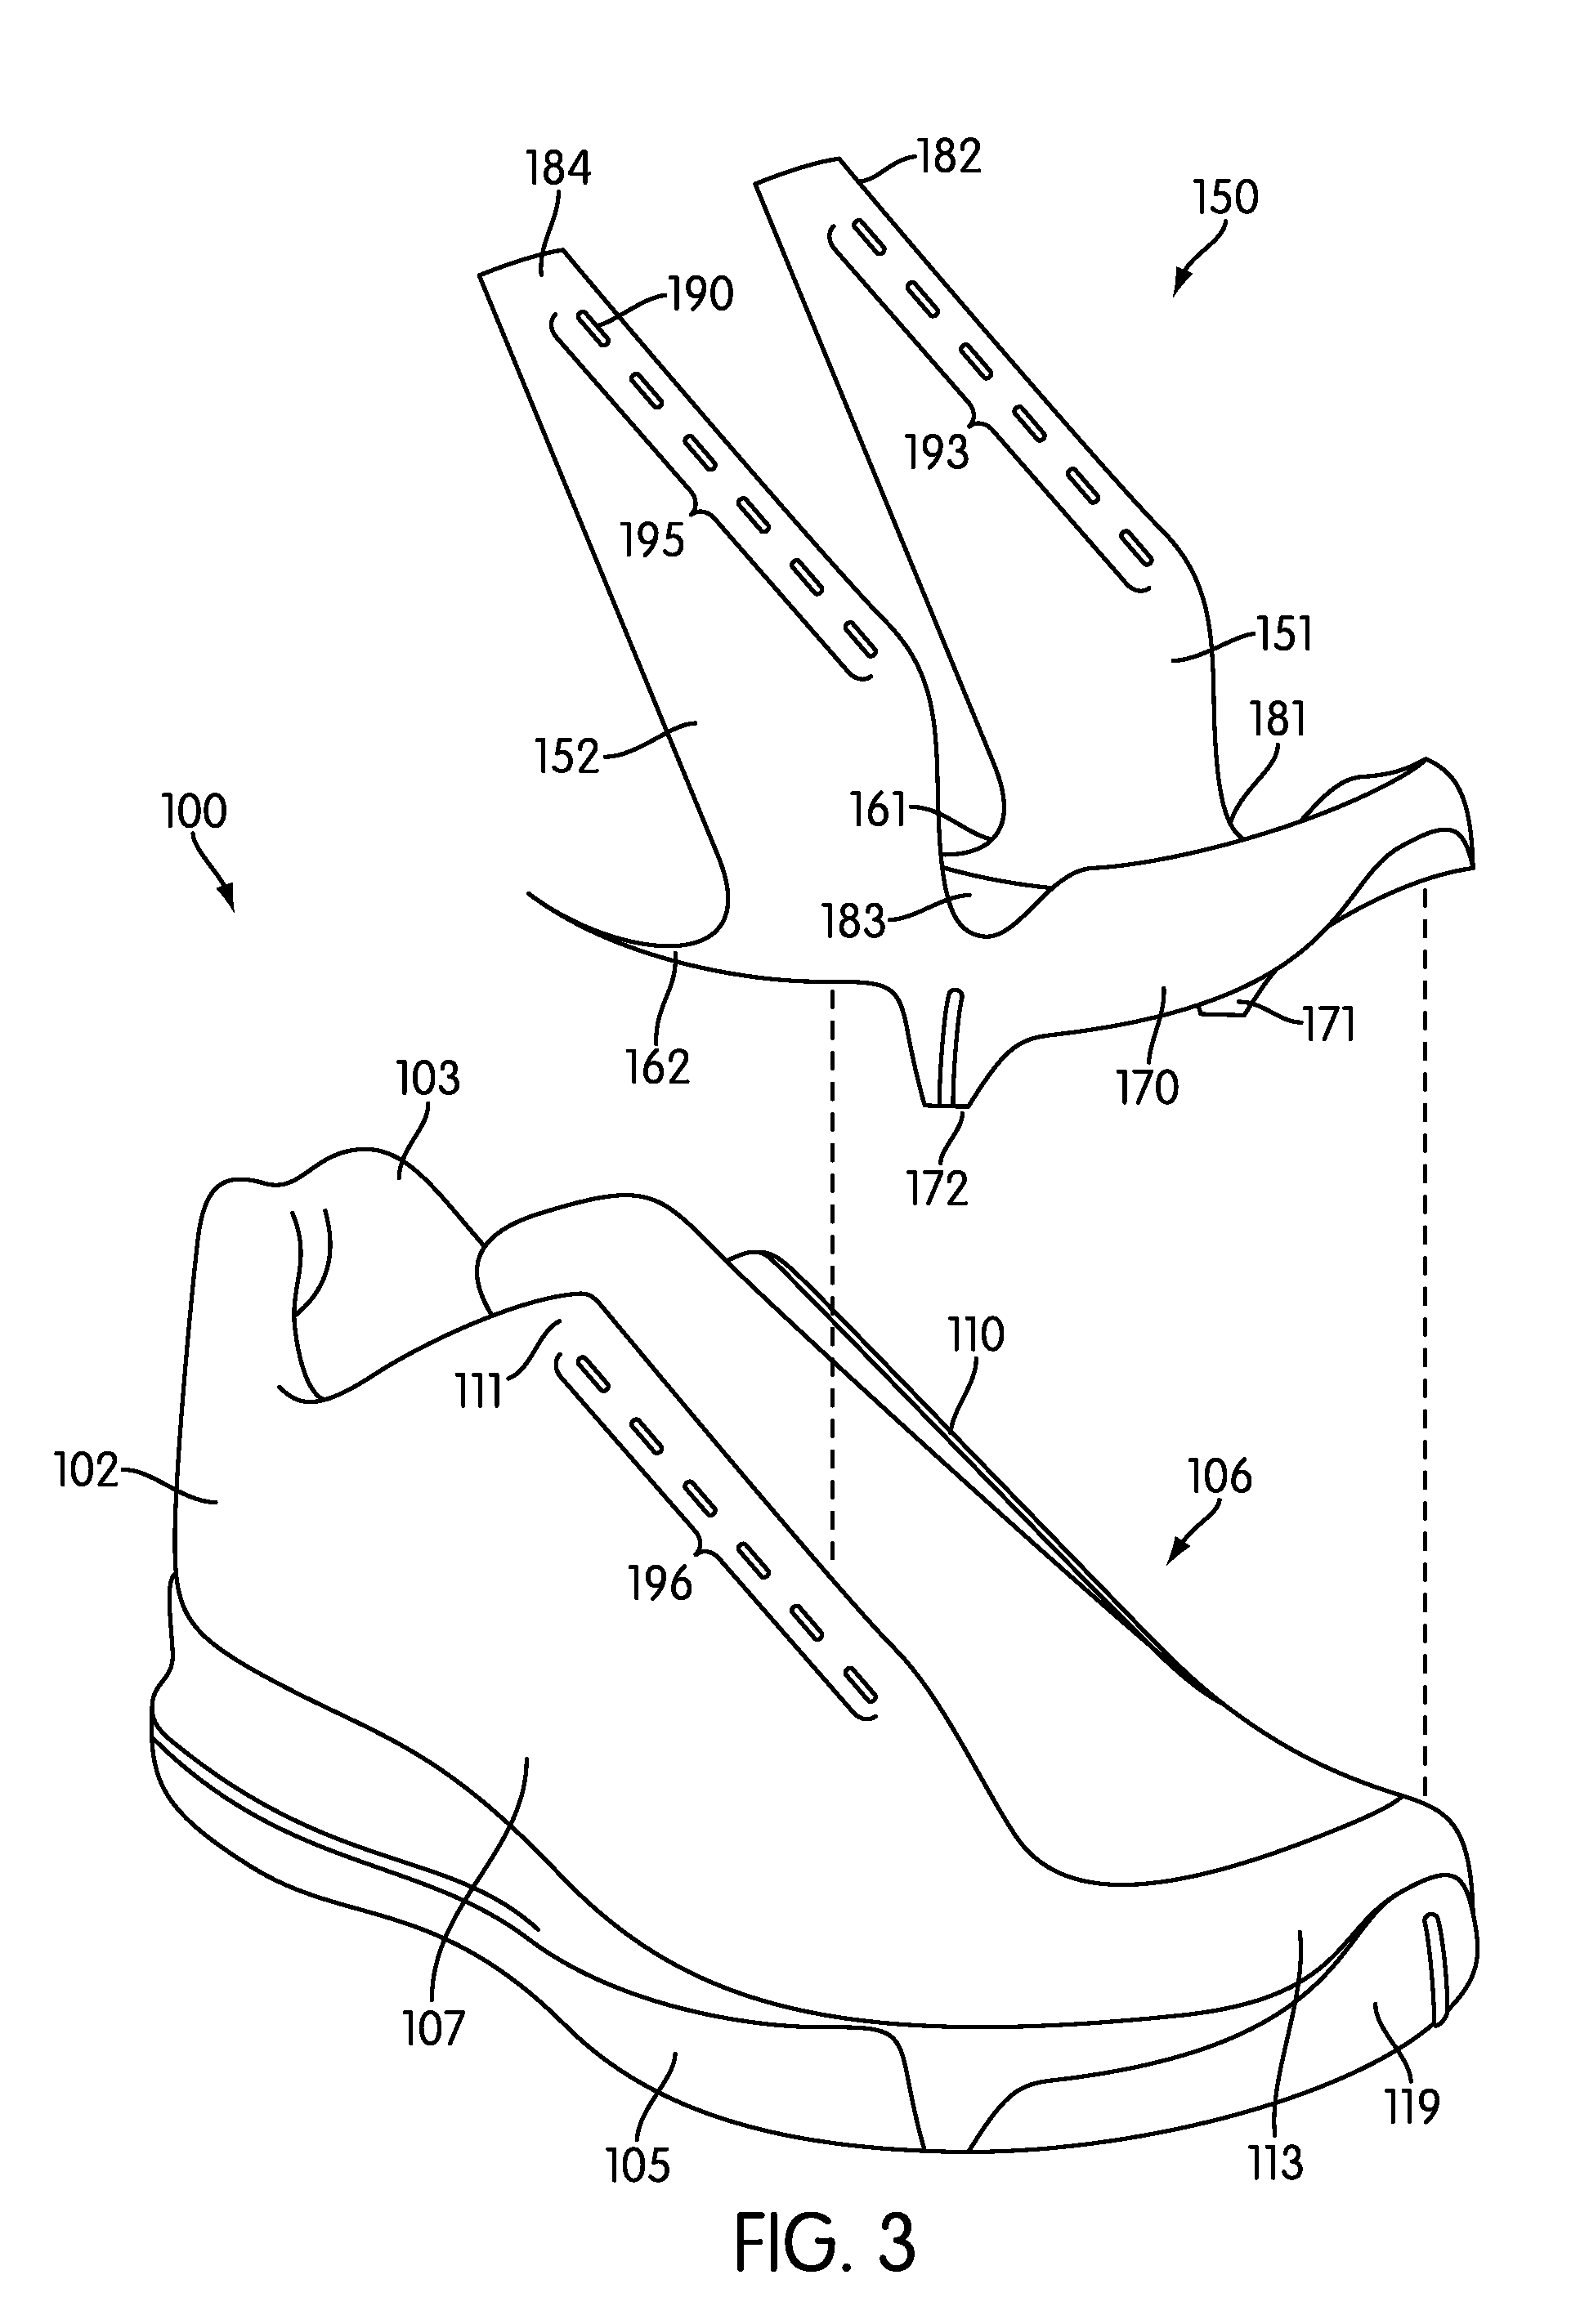 Article of Footwear with Arch Wrap